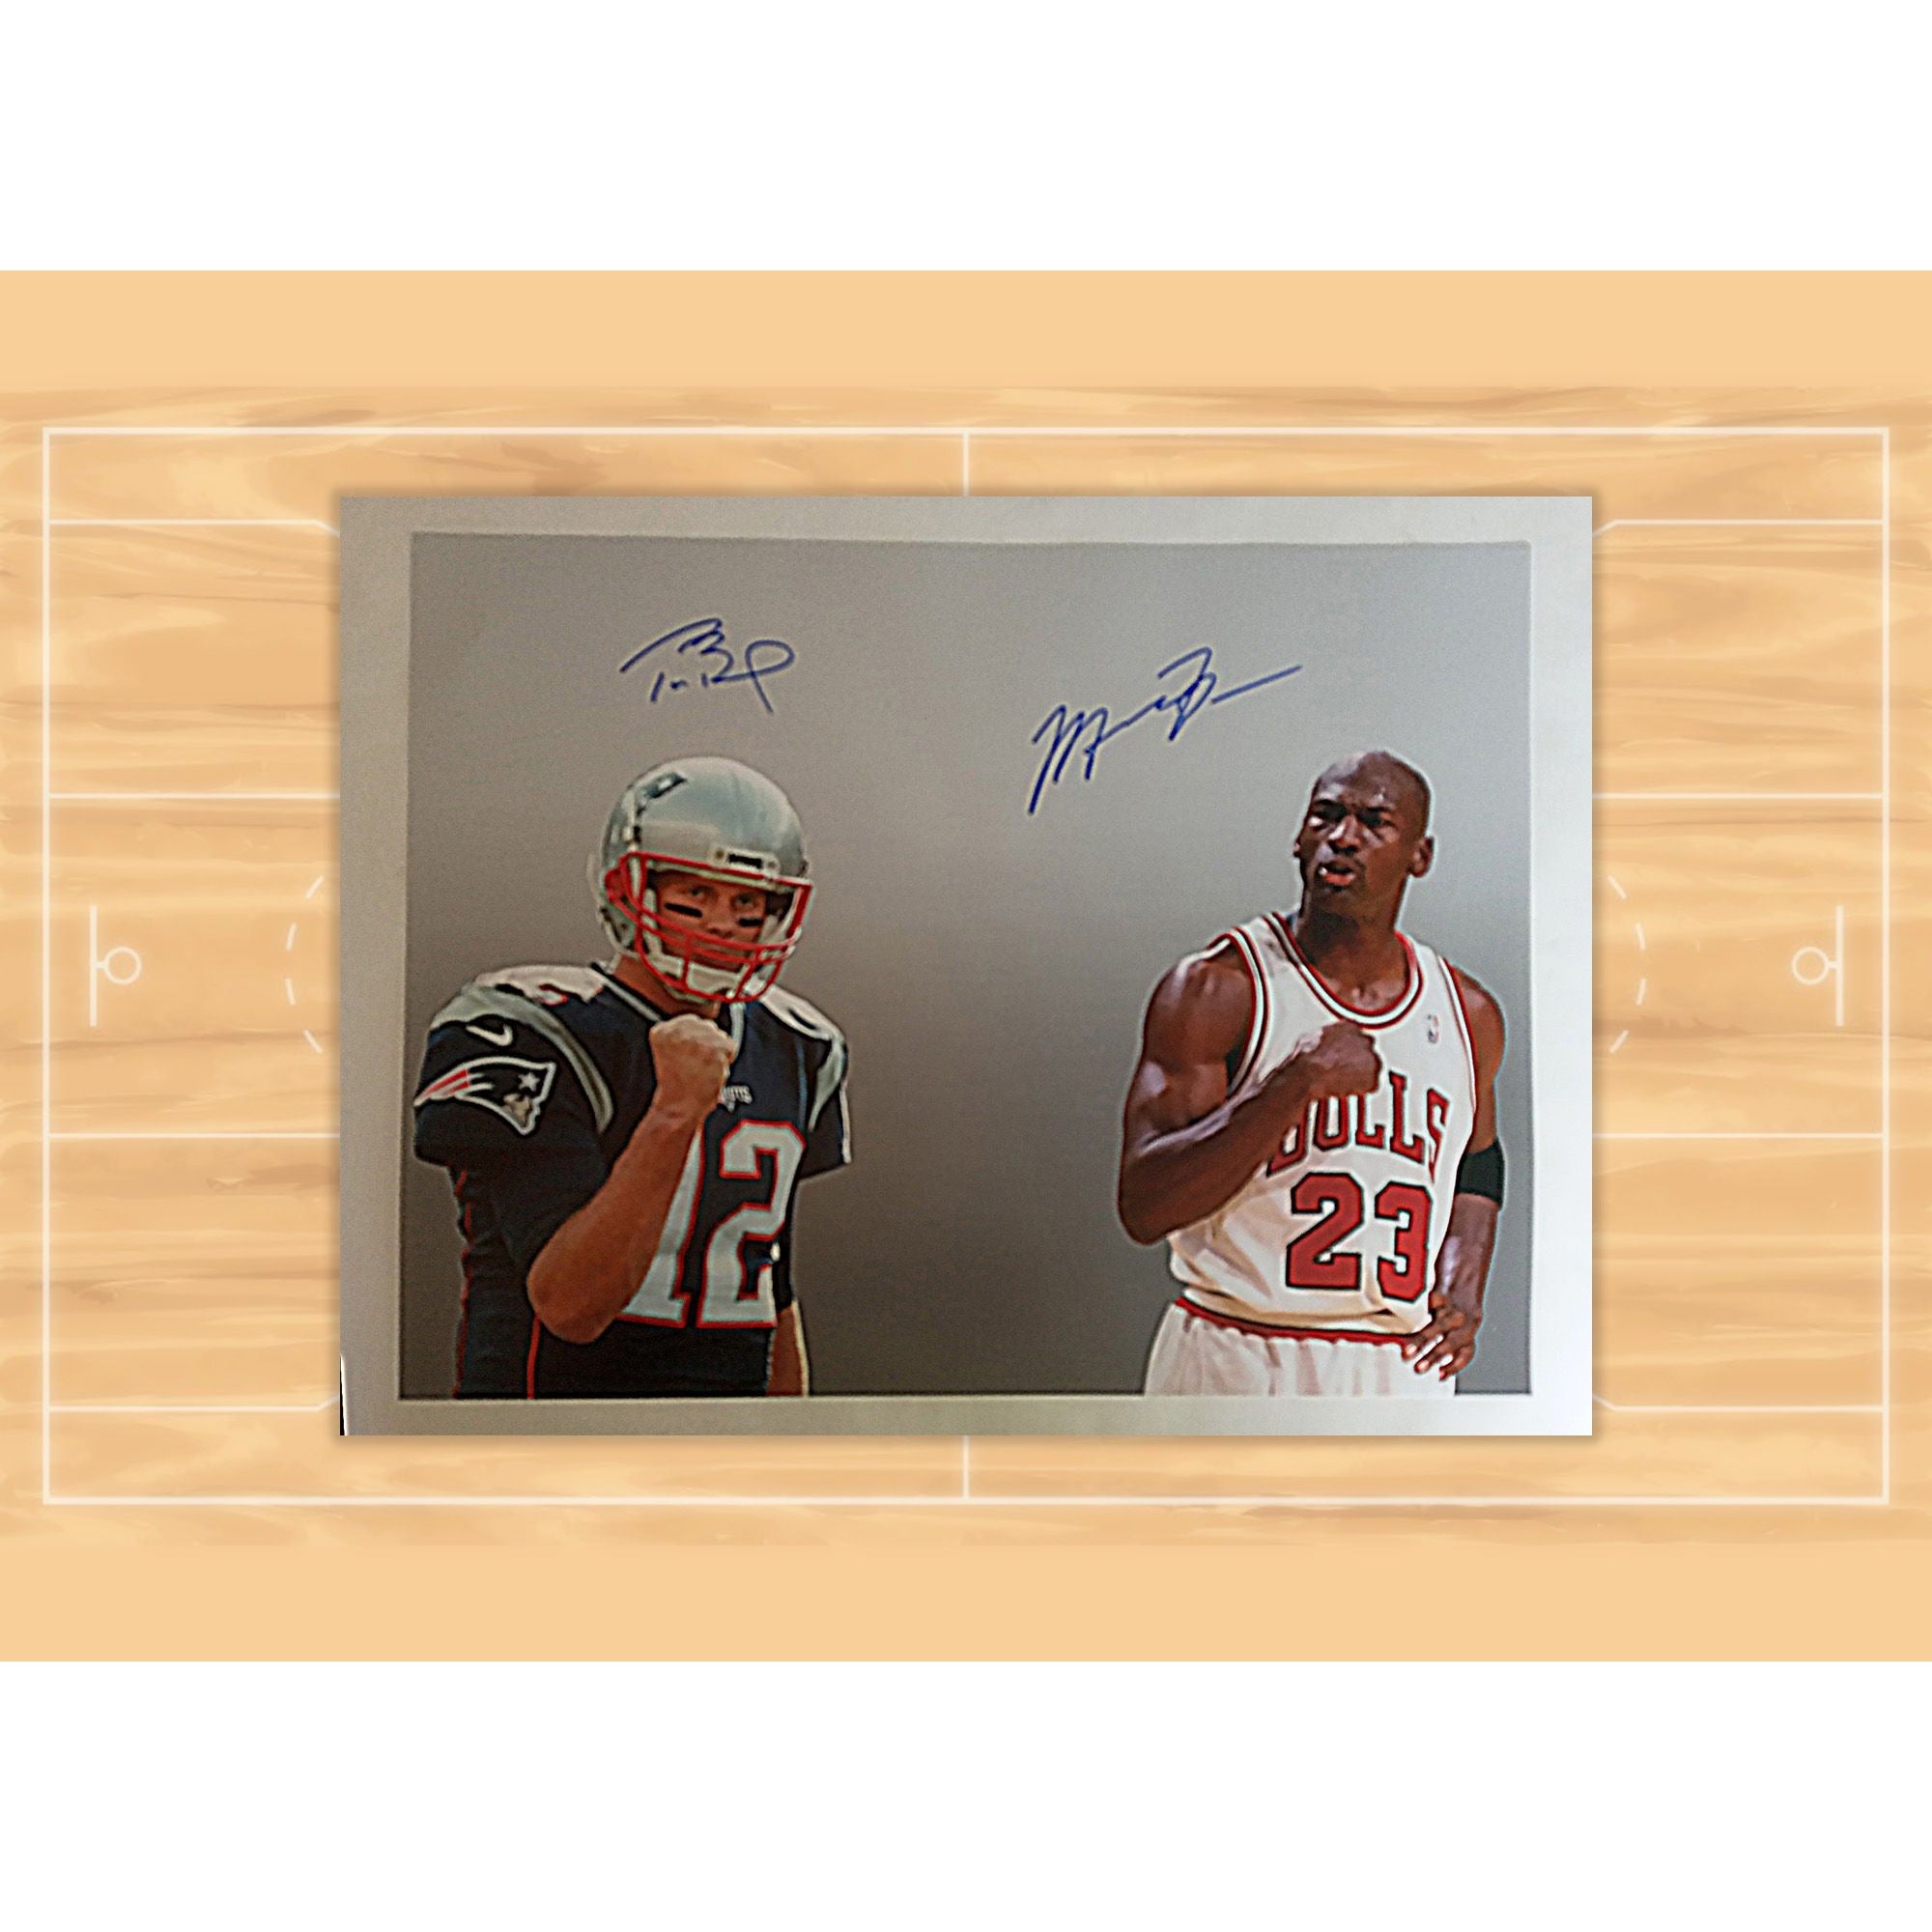 Michael Jordan and Tom Brady 16x20 signed with proof